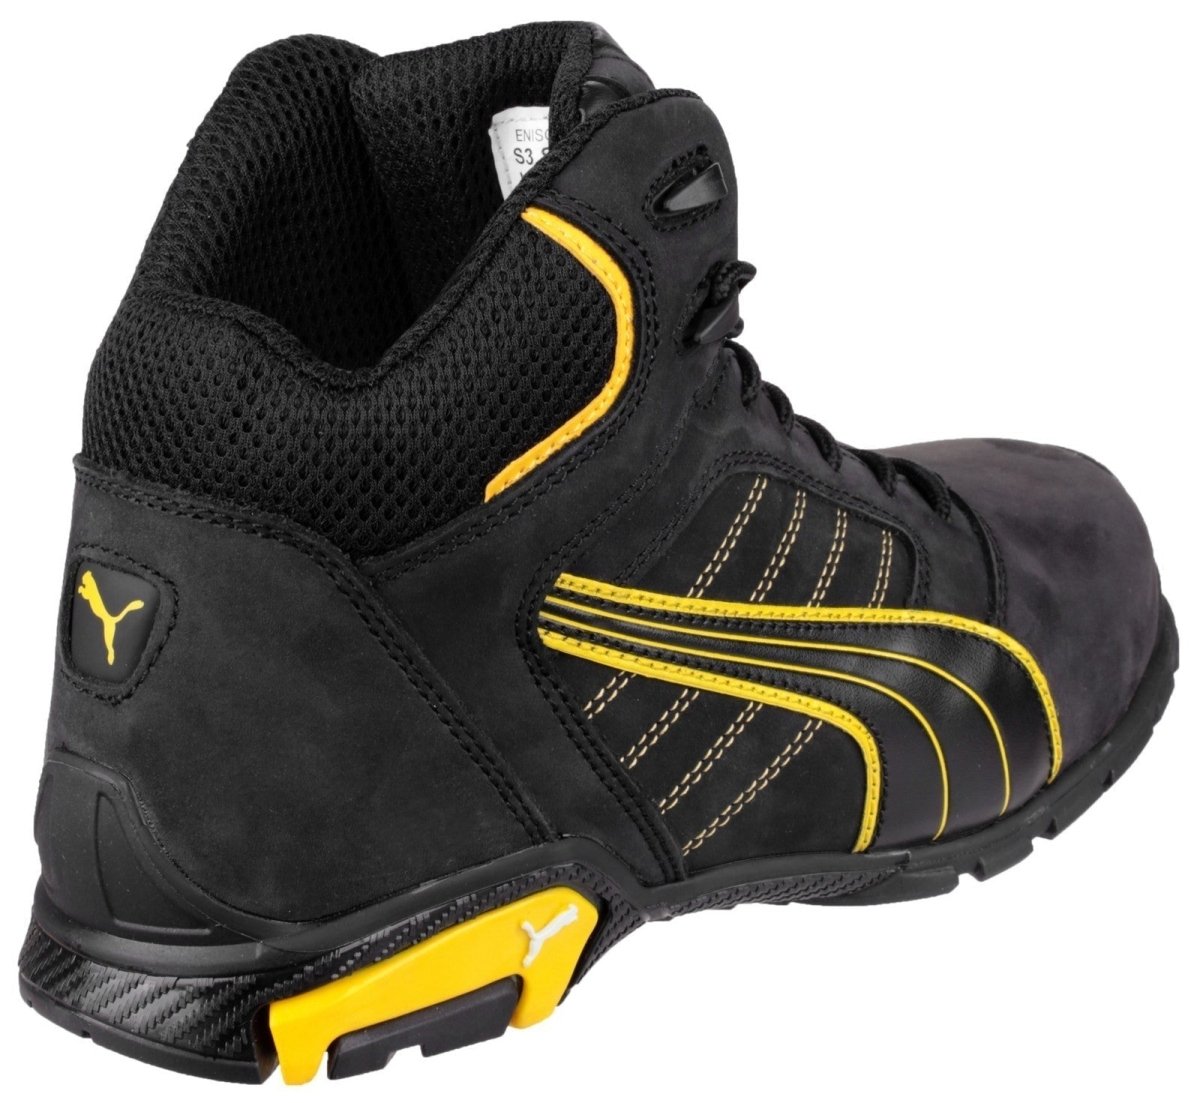 Puma Safety Amsterdam Mid Safety Boots - Shoe Store Direct